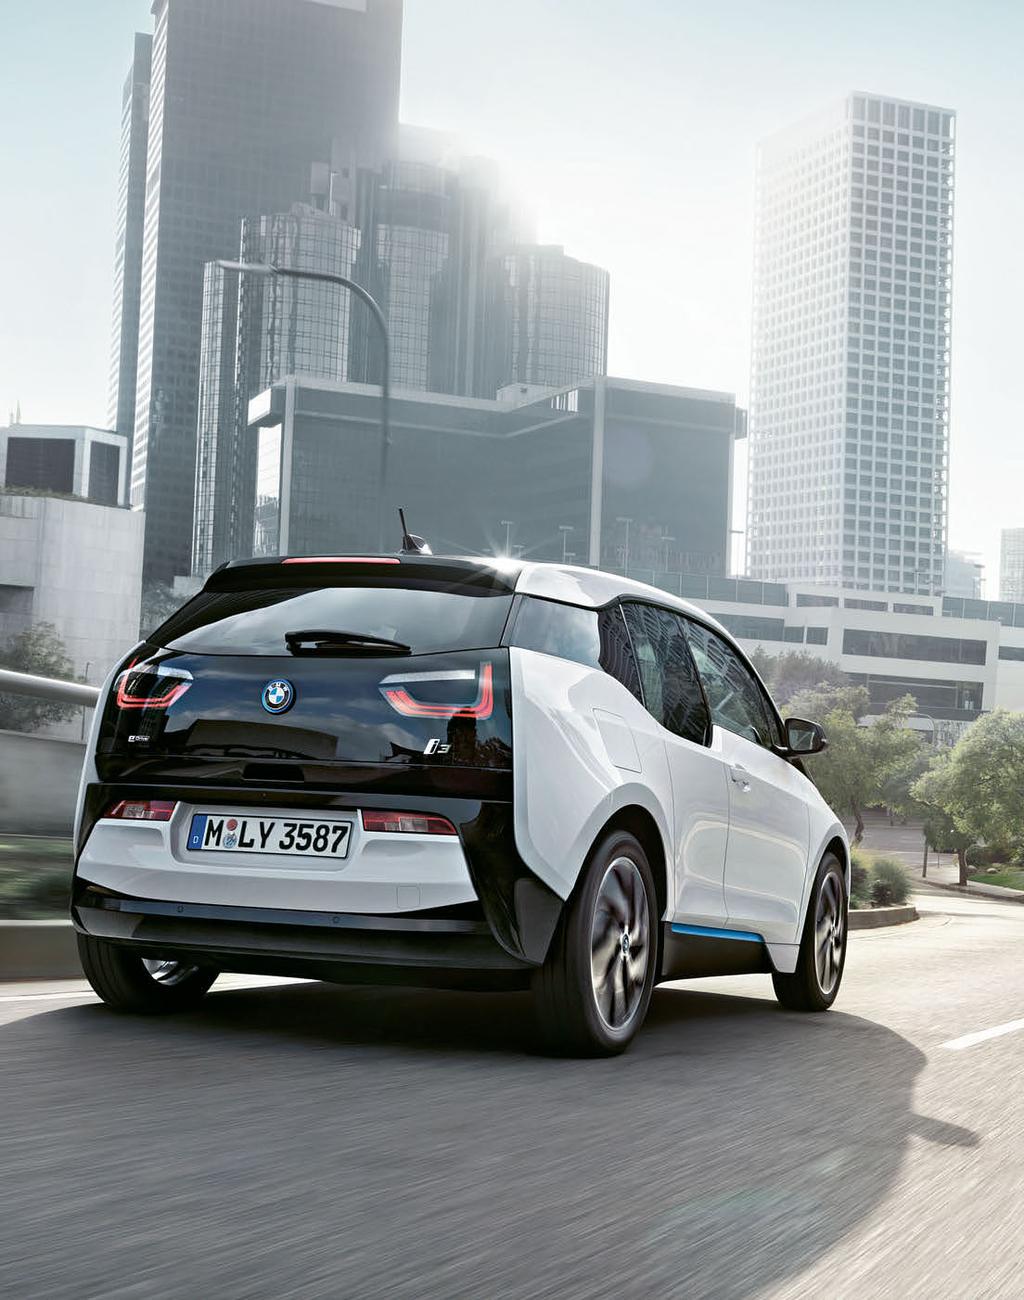 THE BMW i3 02 03 01 THE BMW i3. BMW i3 experience... 04 19 02 INNOVATION AND TECHNOLOGY. Sustainability...20 BMW 360 ELECTRIC charging solutions.. 30 Vehicle concept...24 BMW ConnectedDrive.